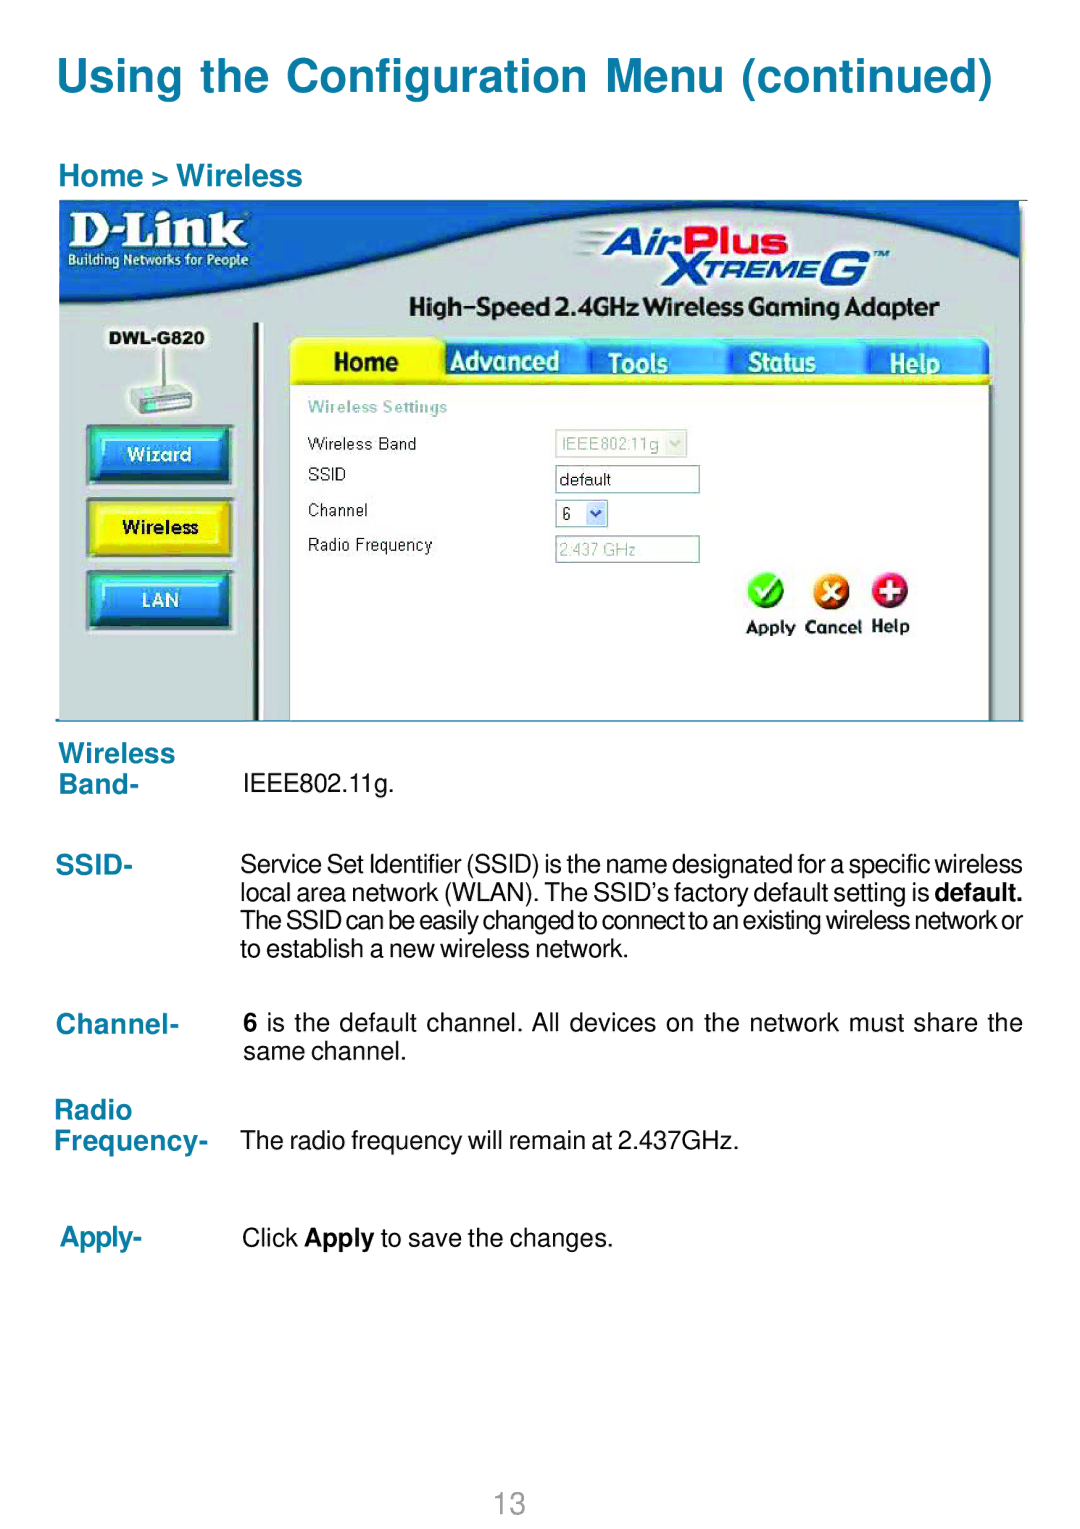 D-Link DWL-G820 manual Home Wireless, Wireless Band, Channel Radio Frequency, Apply 